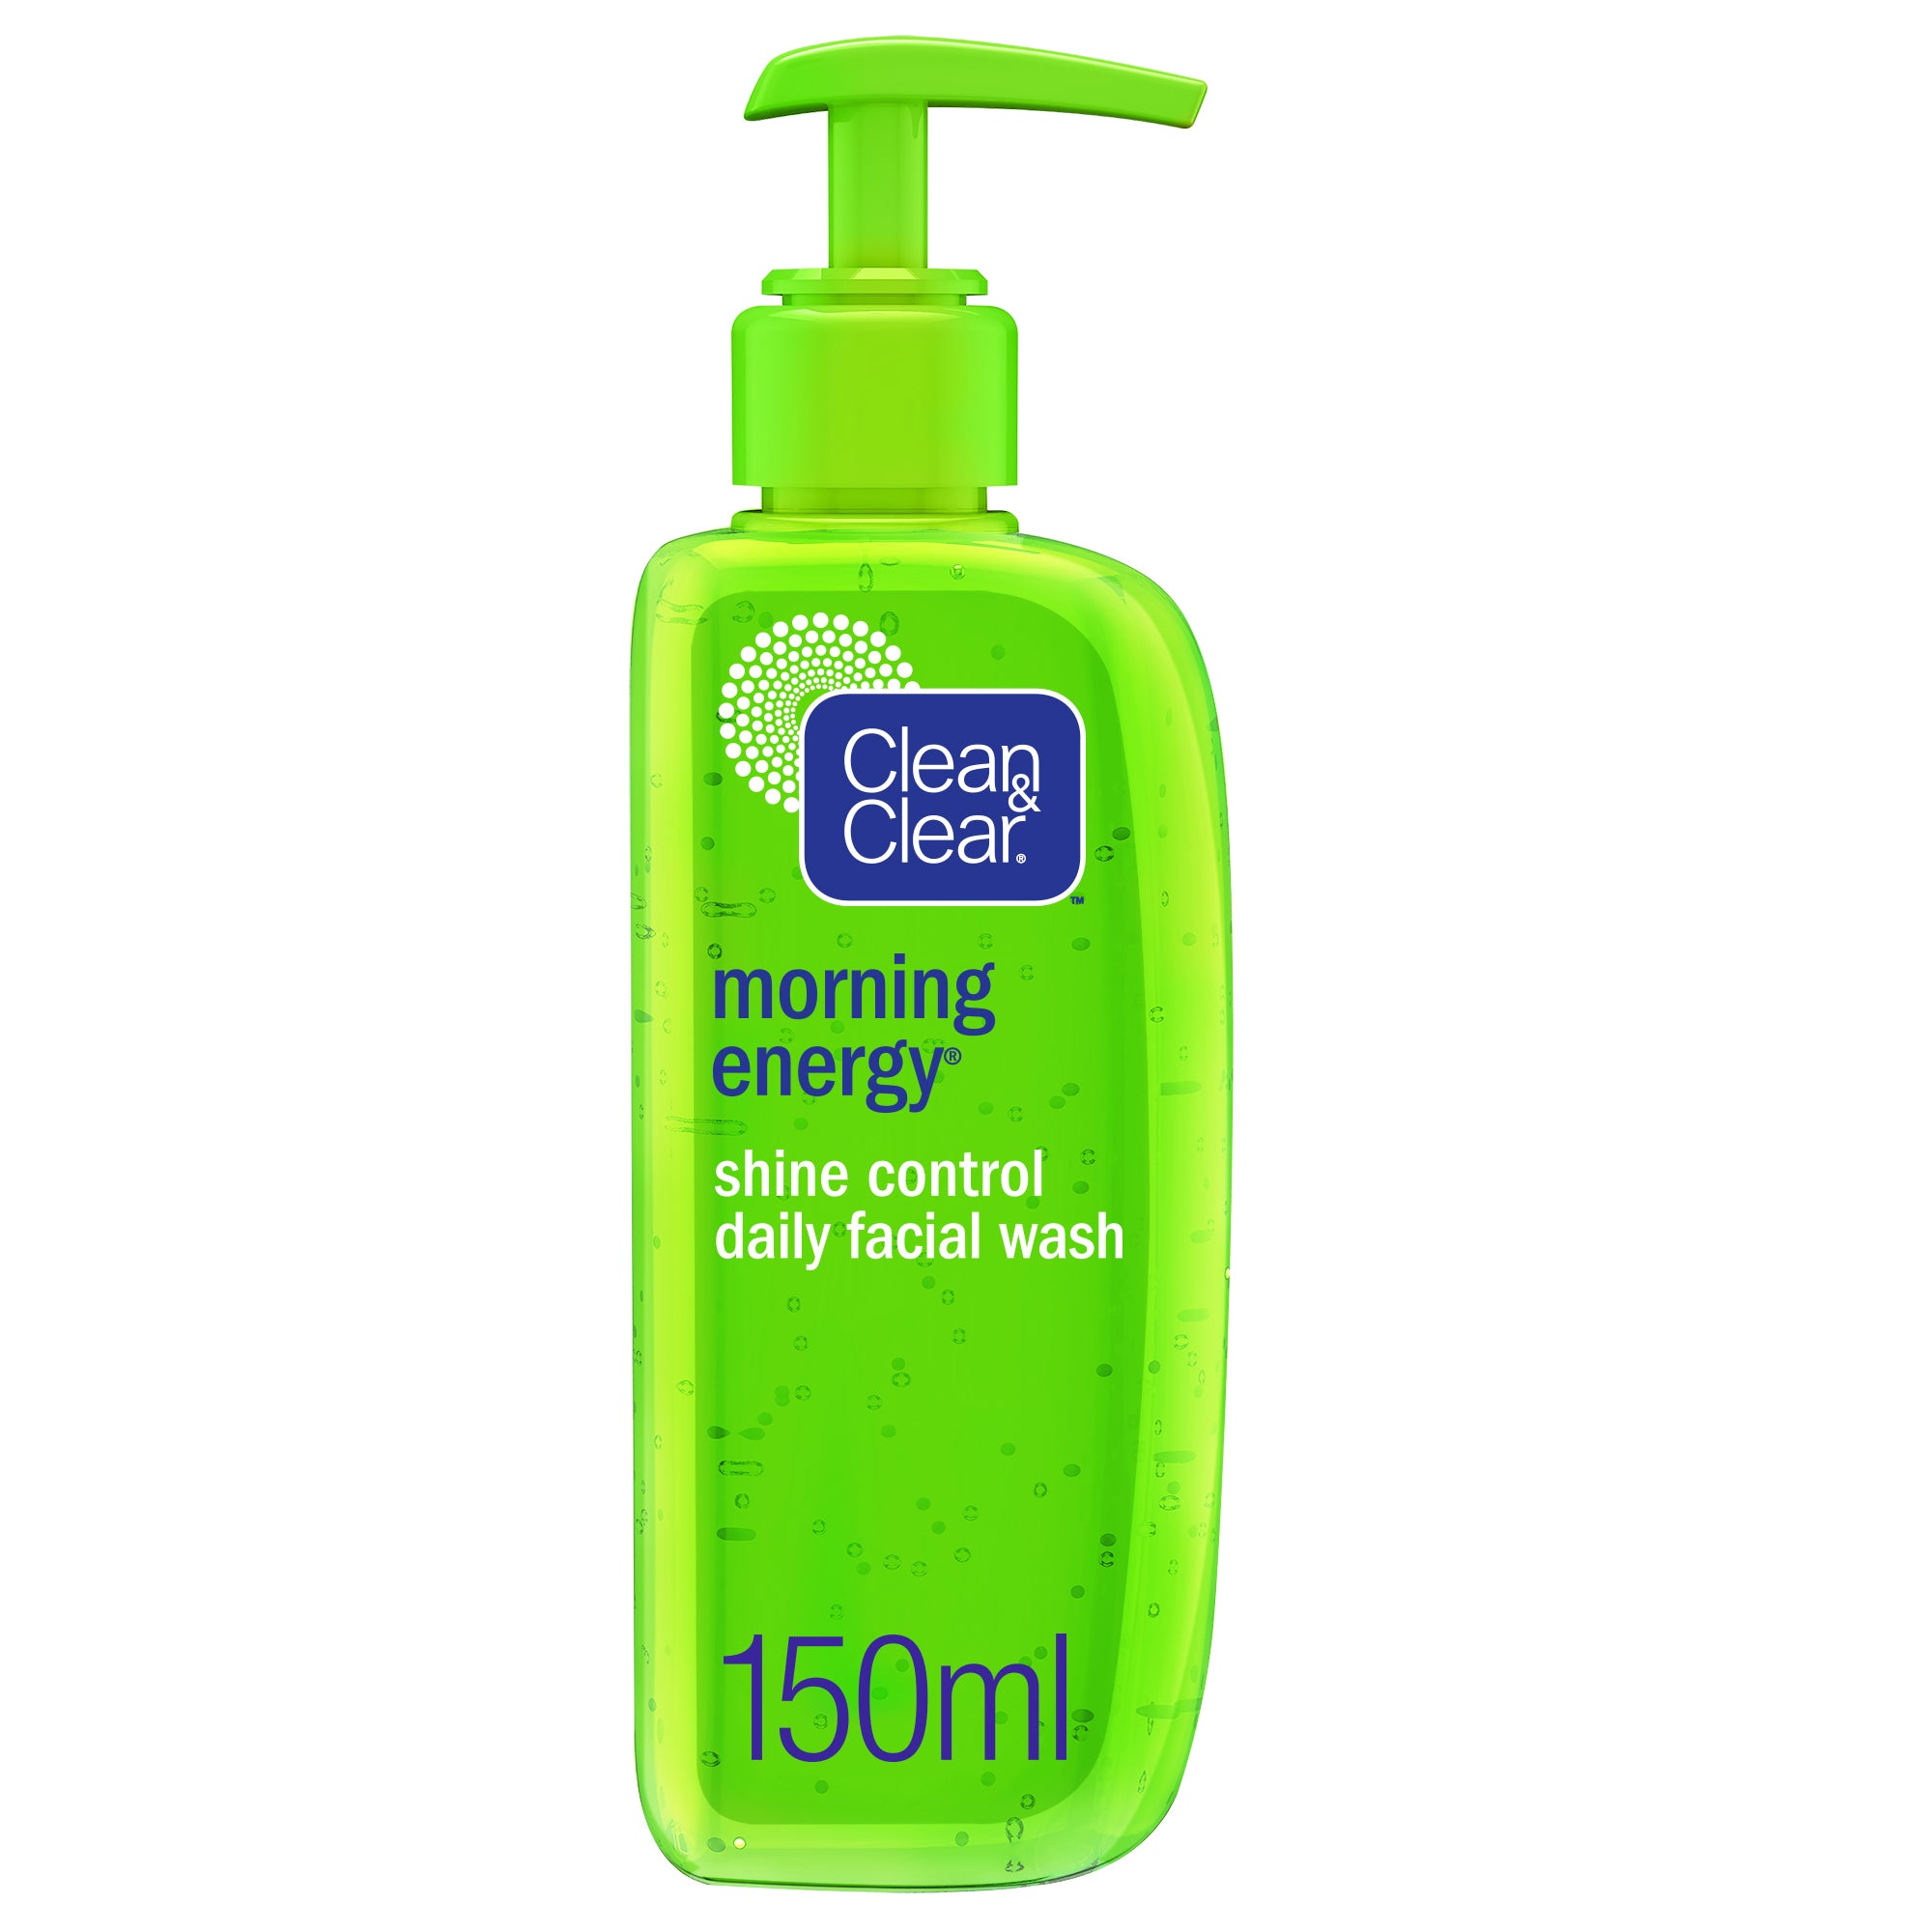 Clean & Clear Daily Face Wash Morning Energy Shine Control